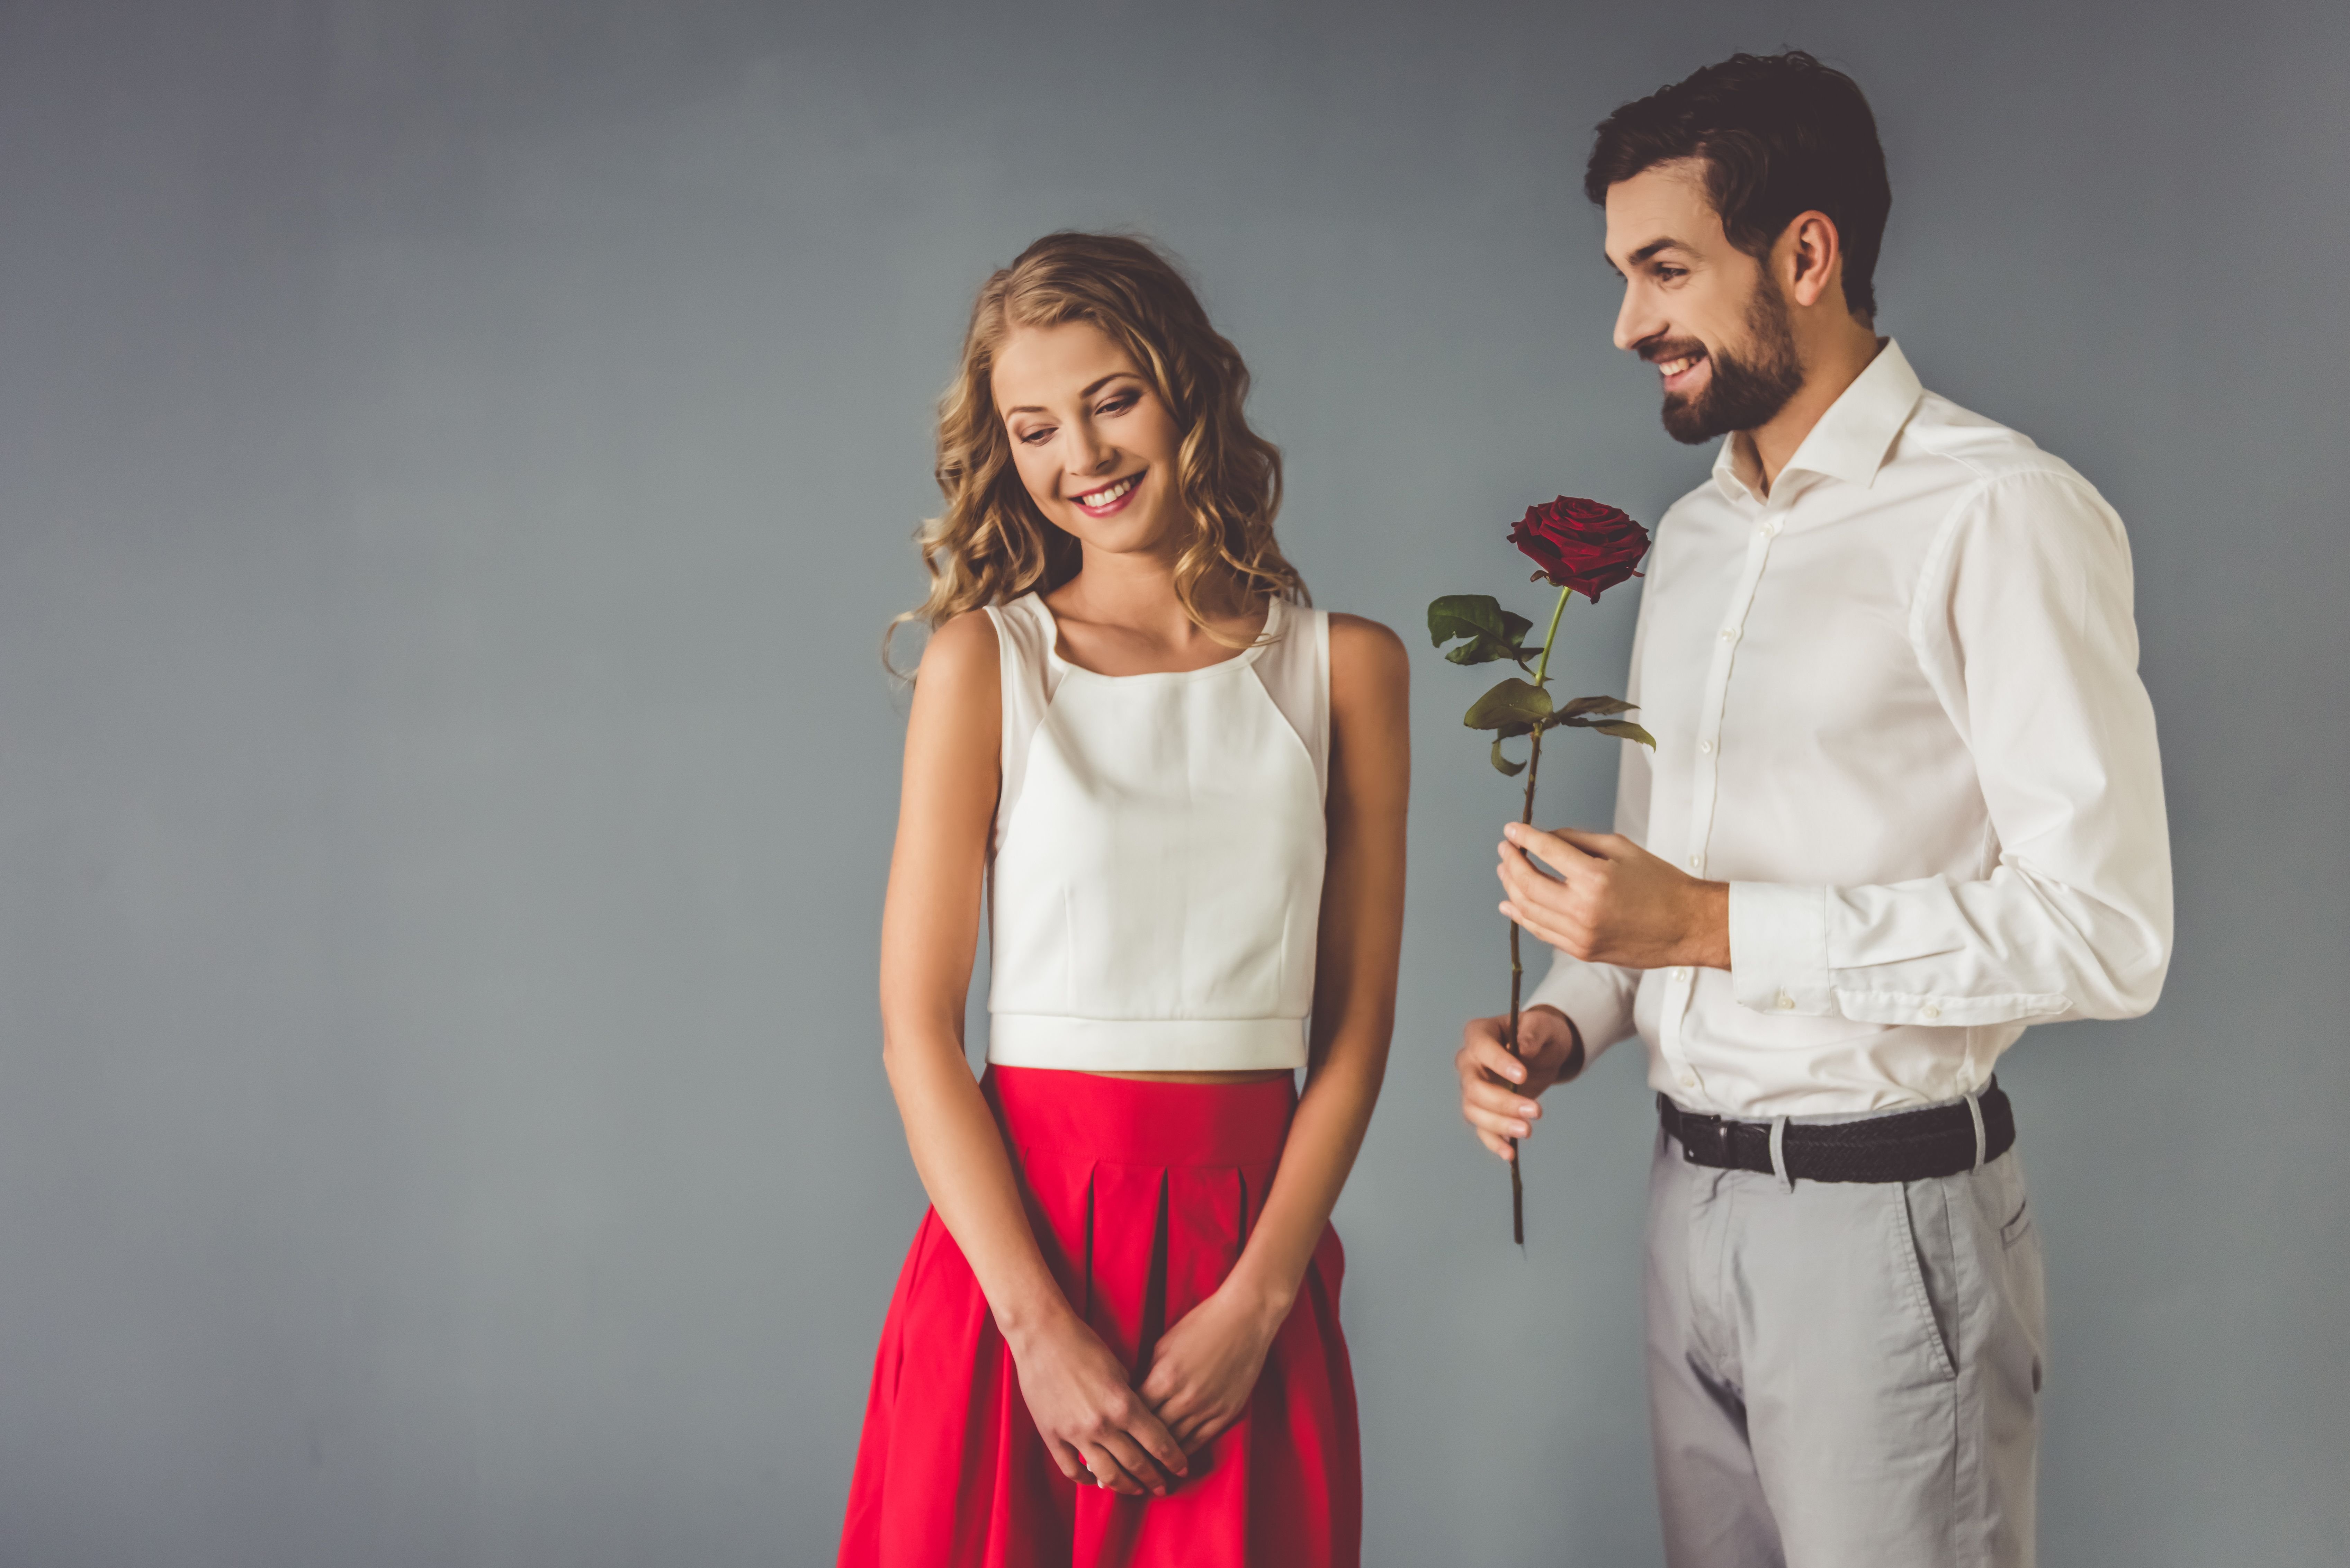 A man gives a woman a red rose. | Source: Shutterstock